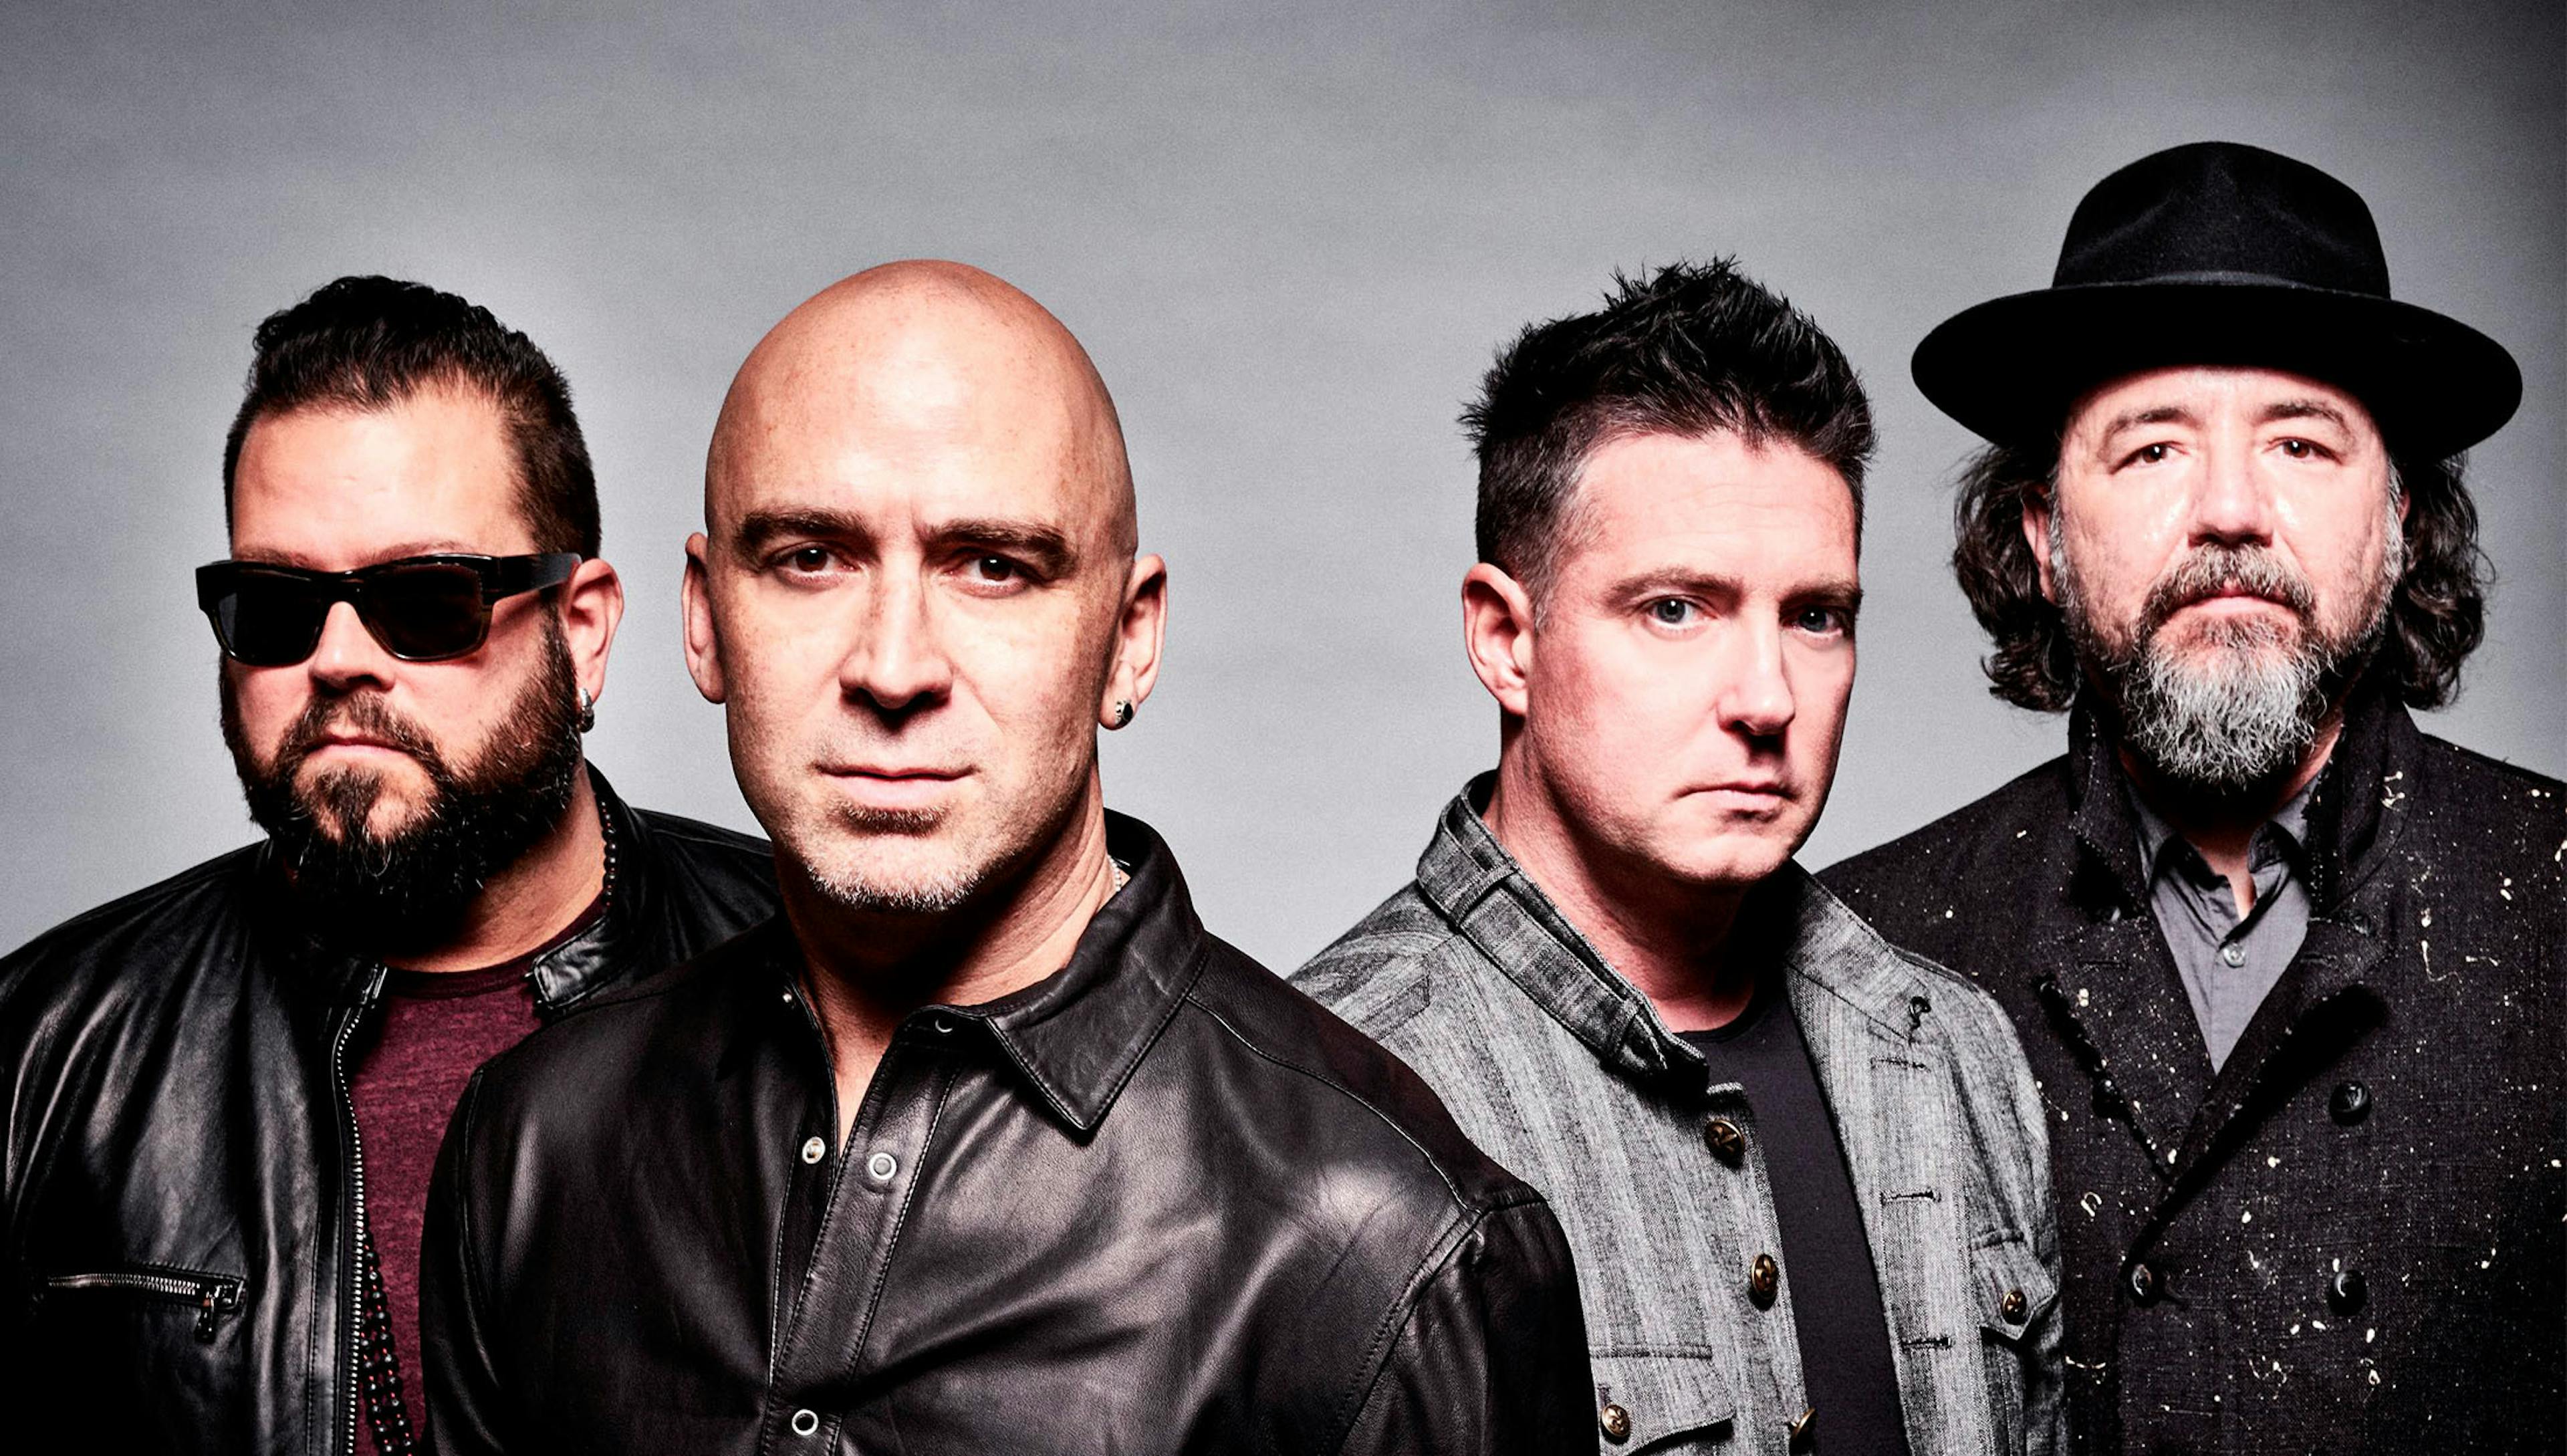 Live Reveal Previously Unreleased Track From Throwing Copper